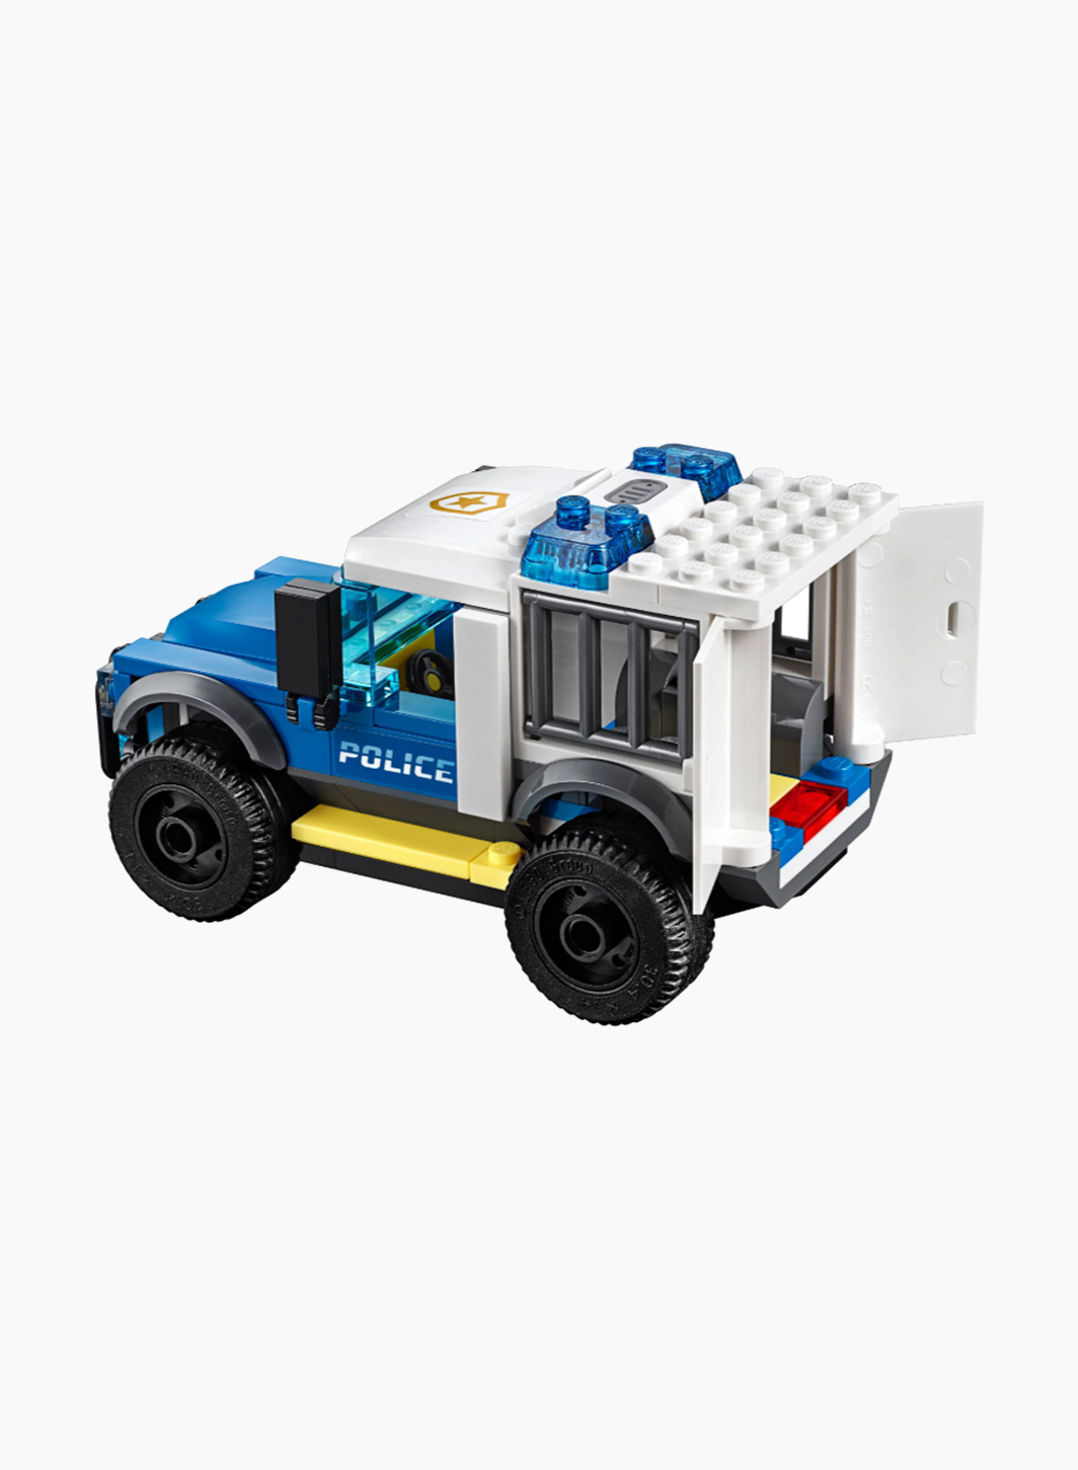 Lego City Constructor Police Station